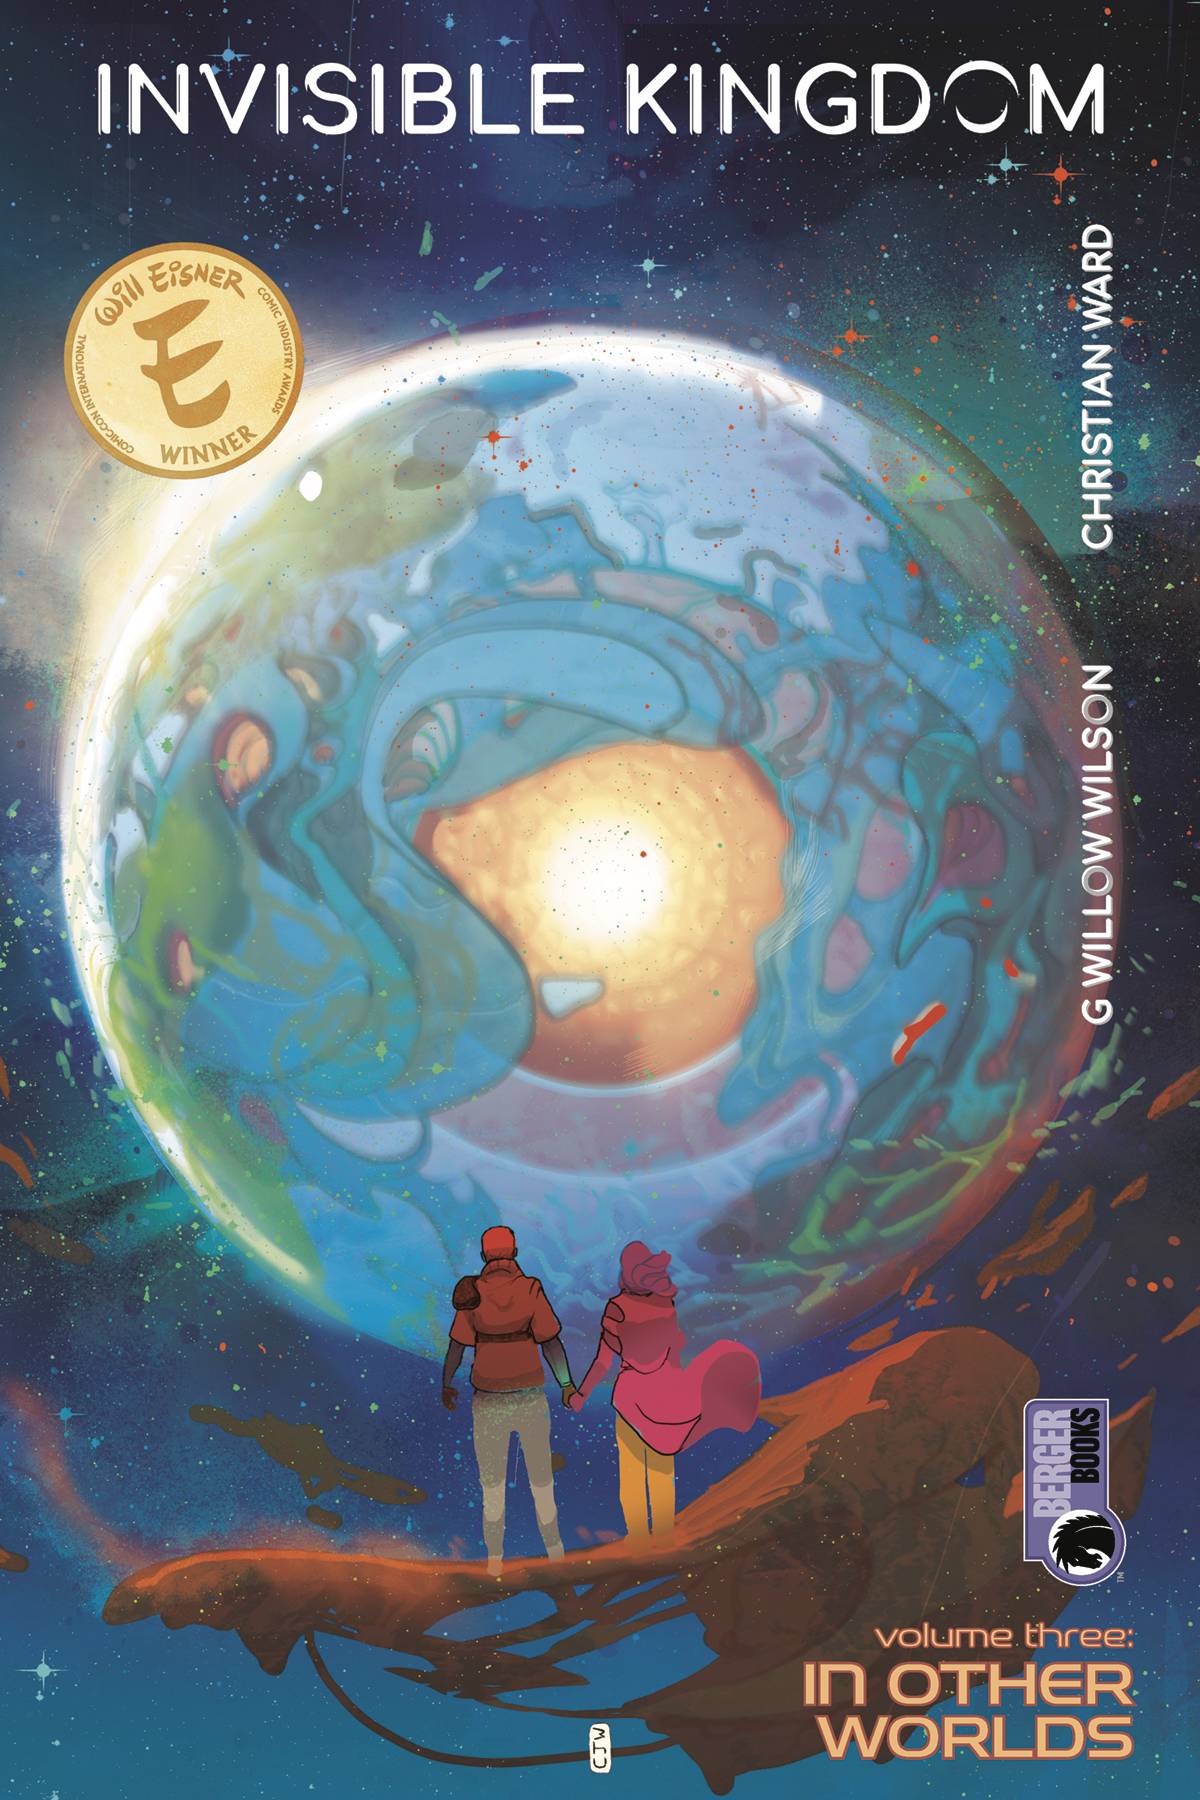 Invisible Kingdom (2019) Volume 3: In Other Worlds